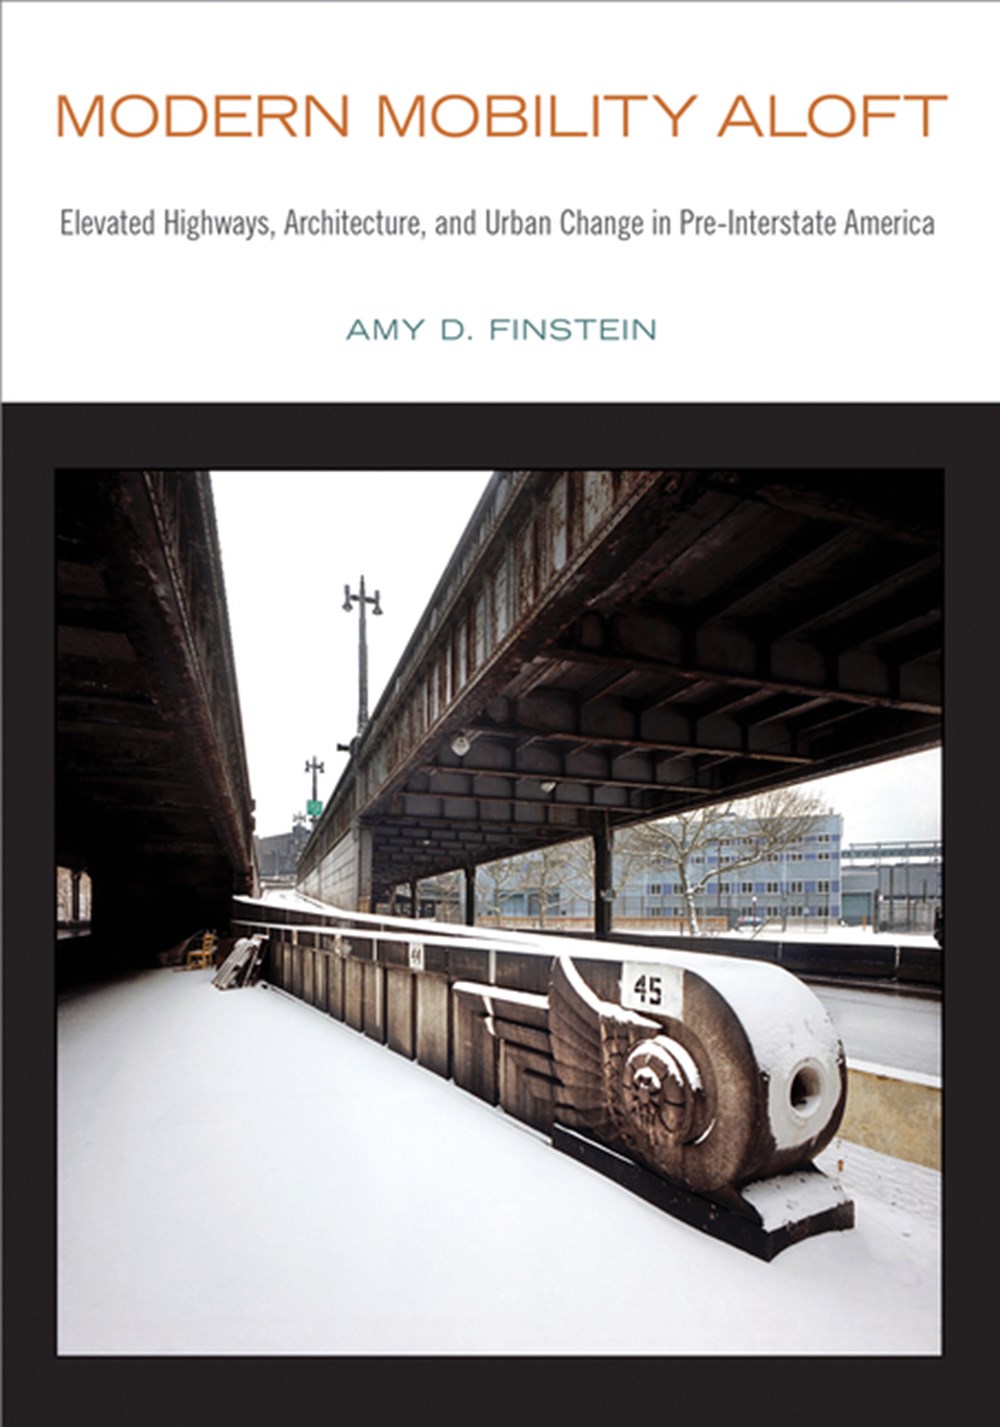 Modern Mobility Aloft: Elevated Highways, Architecture, and Urban Change in Pre-Interstate America